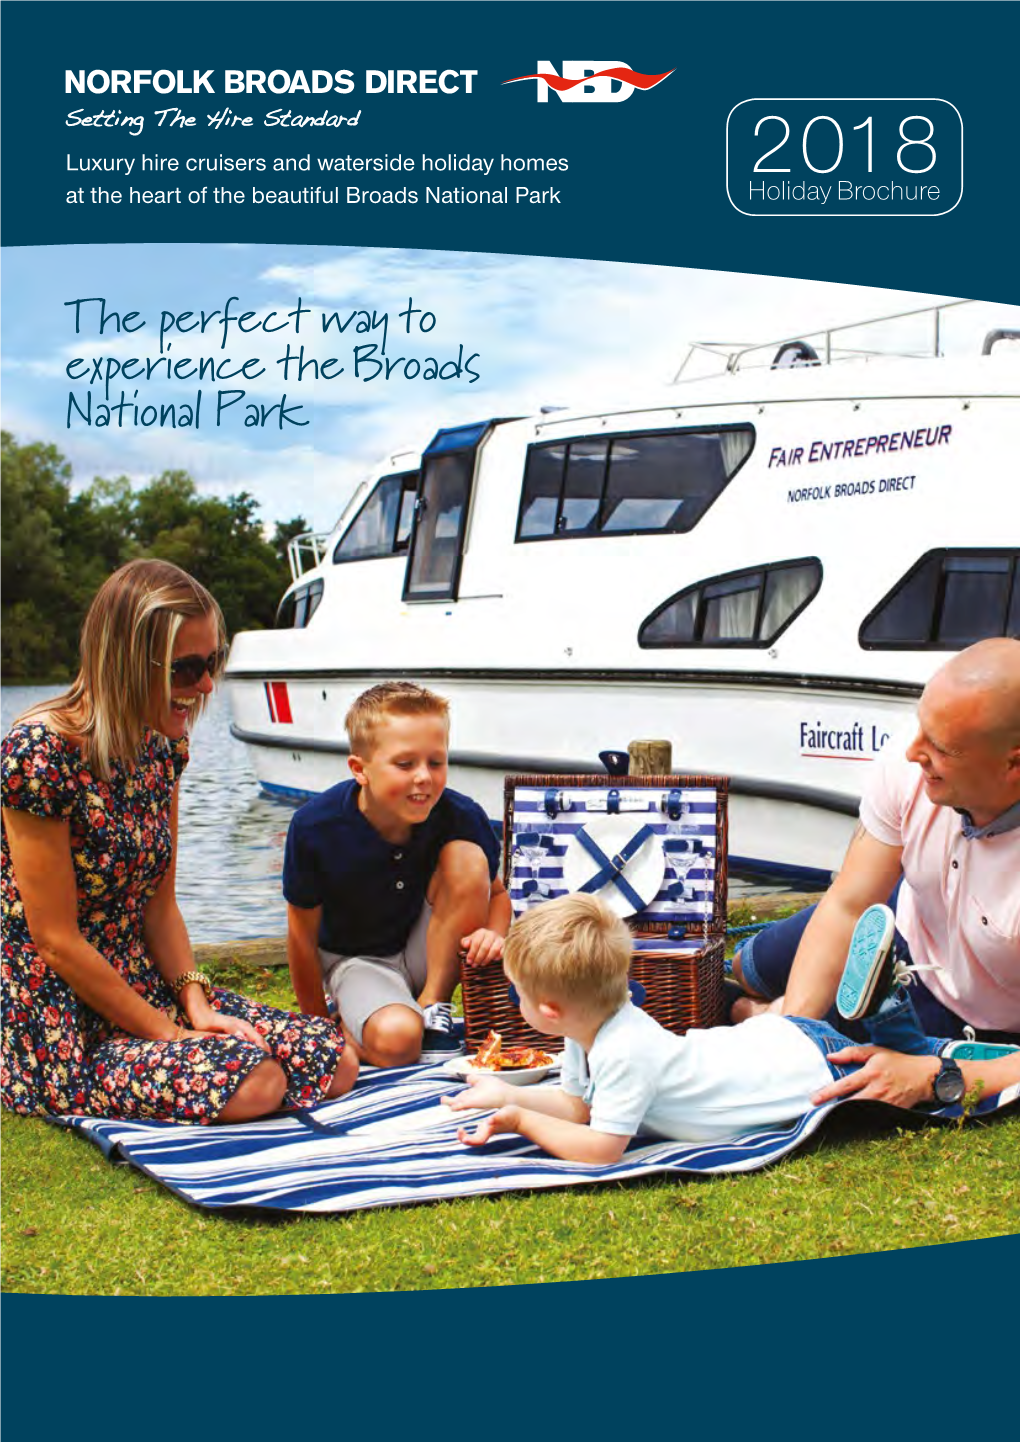 The Perfect Way to Experience the Broads National Park PREMIER CRUISER